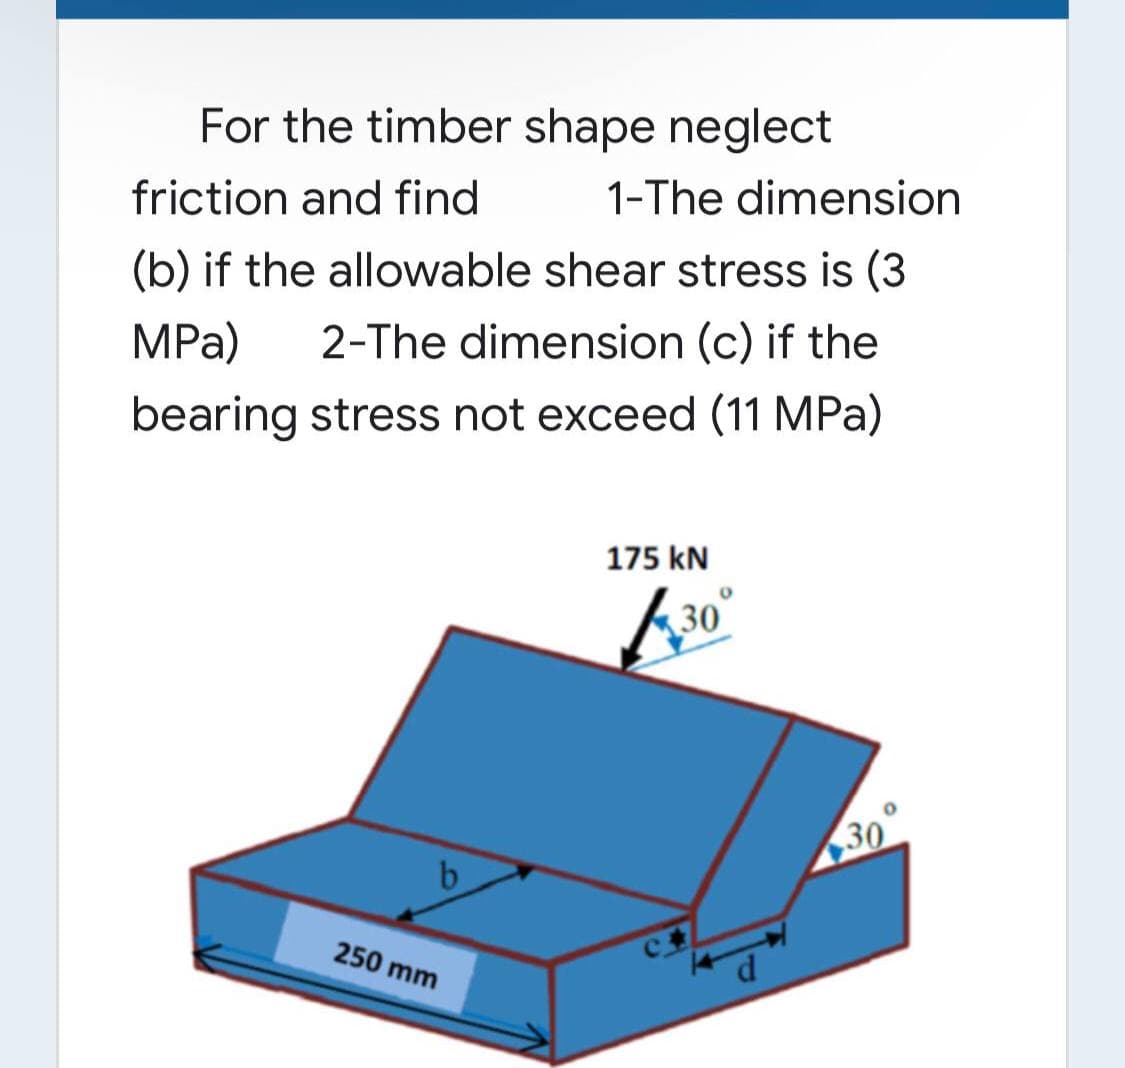 For the timber shape neglect
friction and find
1-The dimension
(b) if the allowable shear stress is (3
2-The dimension (c) if the
MPa)
bearing stress not exceed (11 MPa)
175 kN
30
30
b
250 mm
